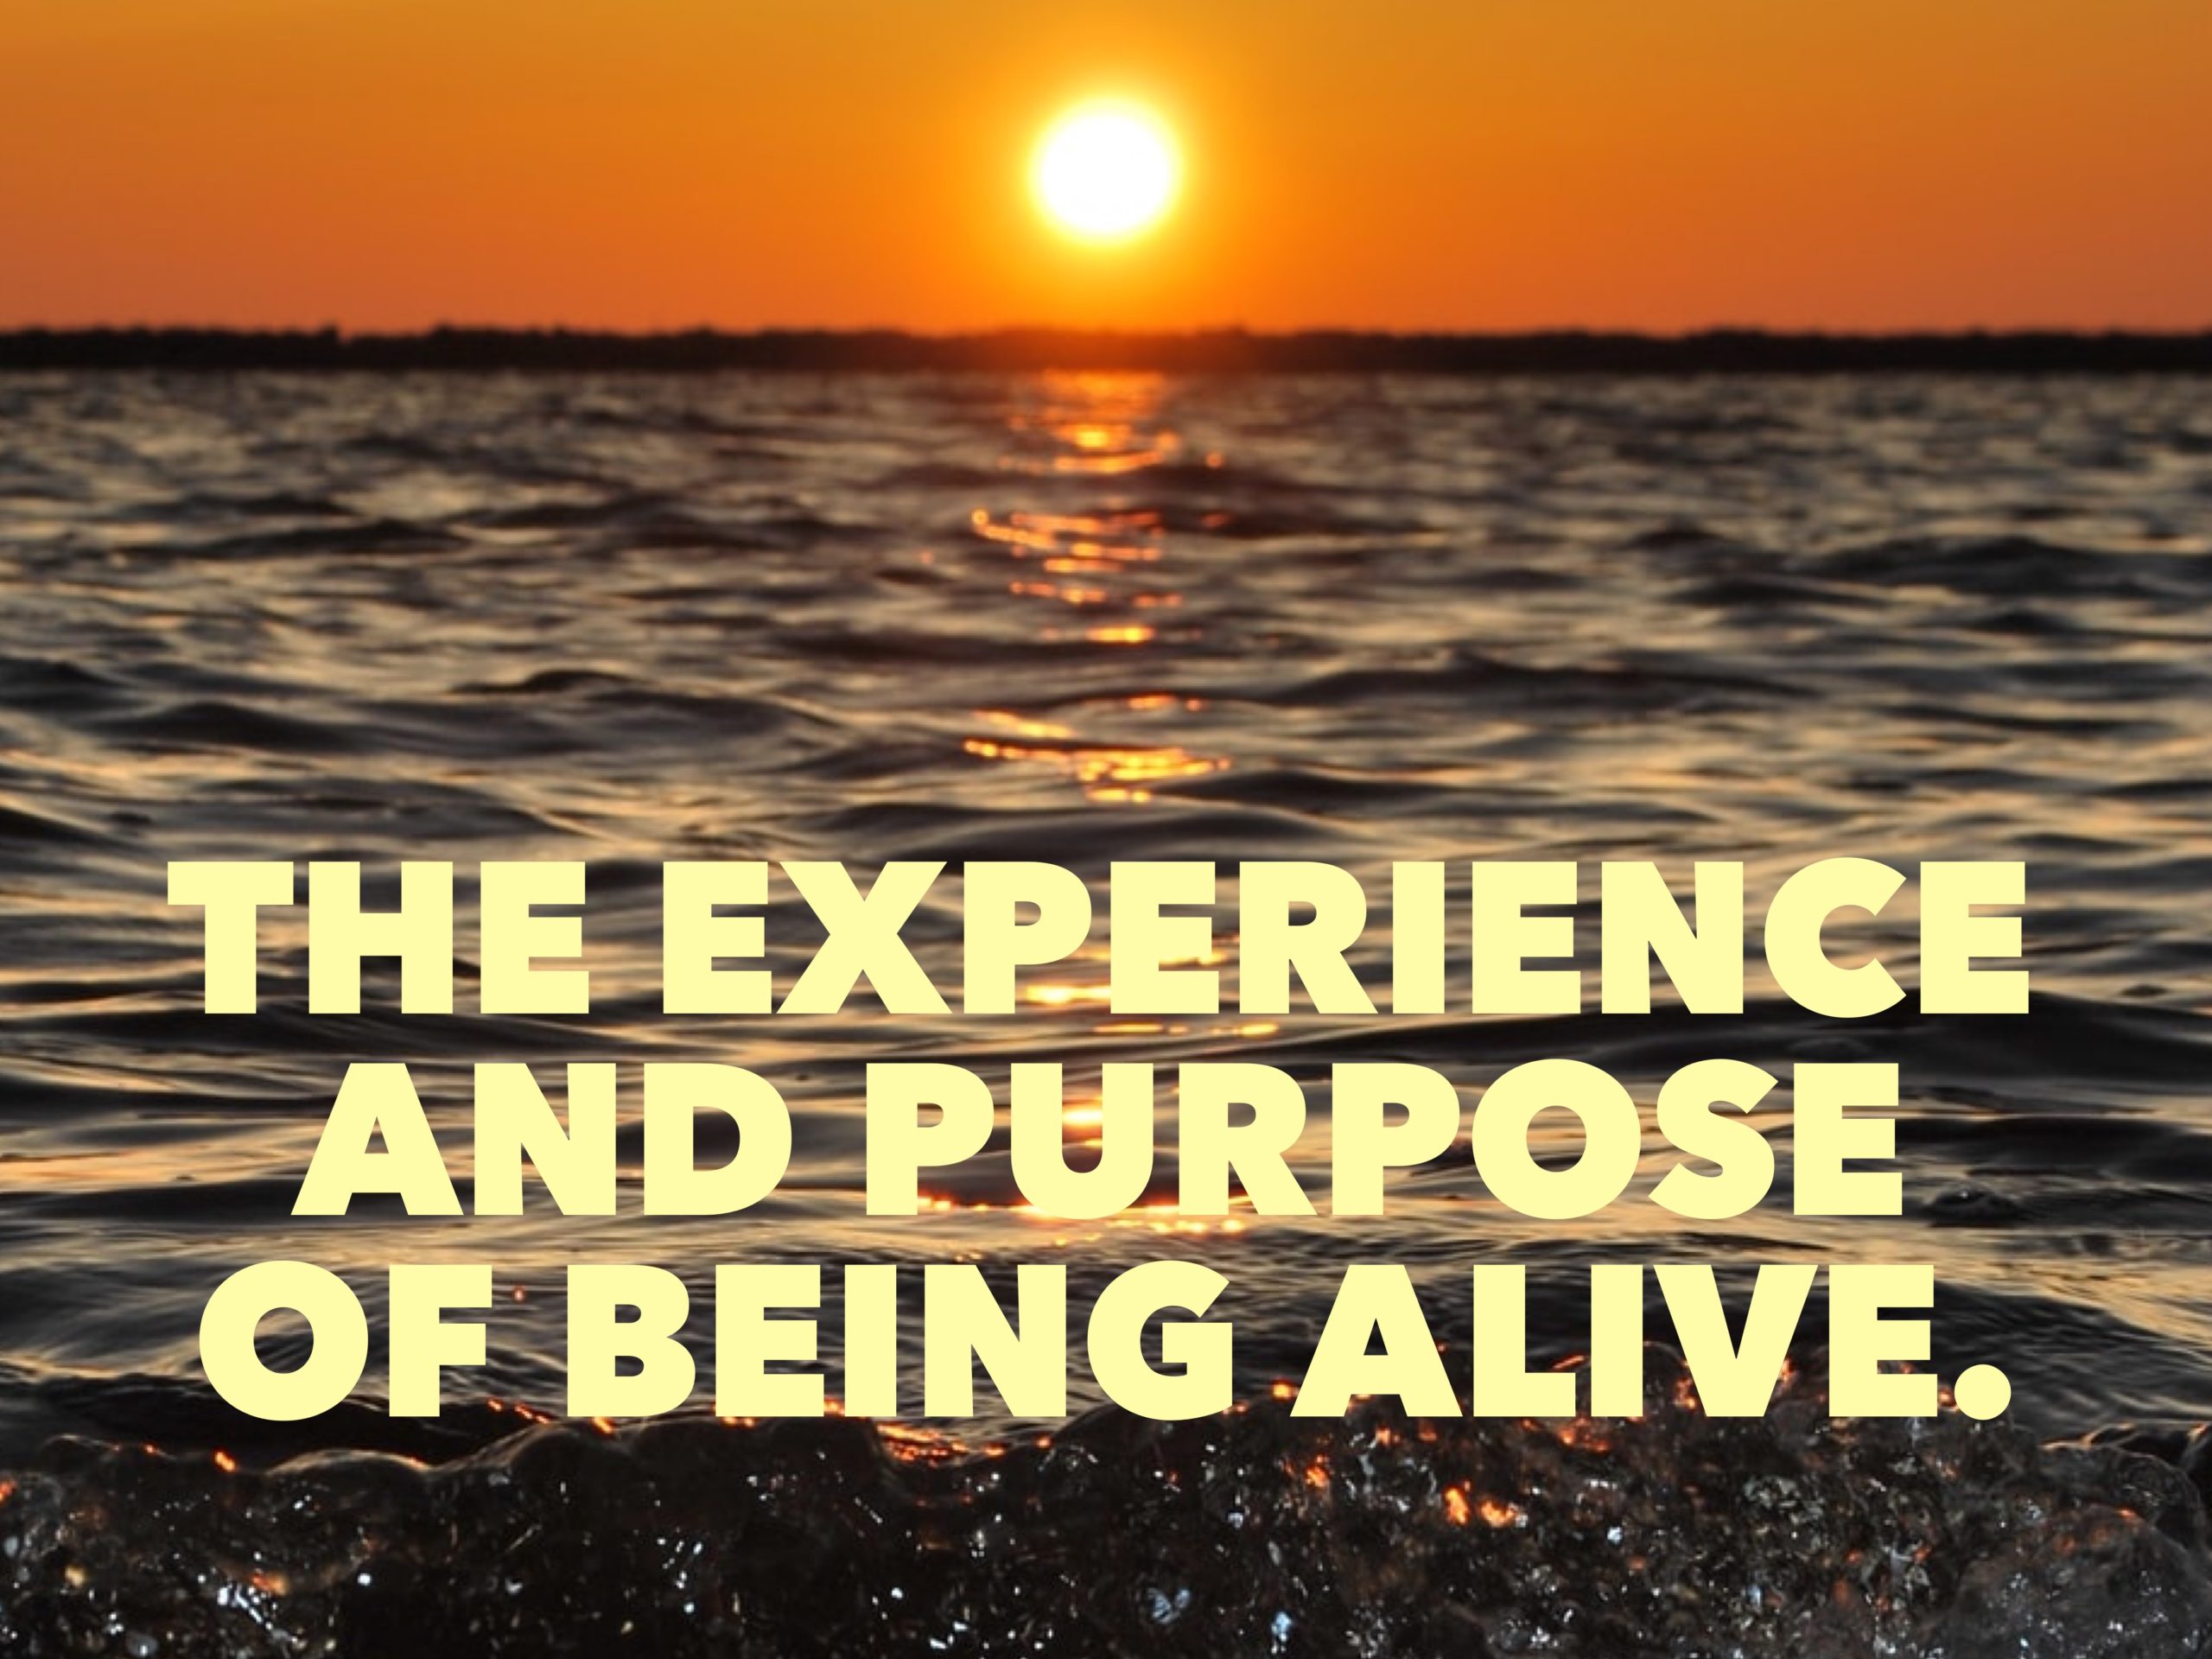 The Experience and Purpose of Being Alive